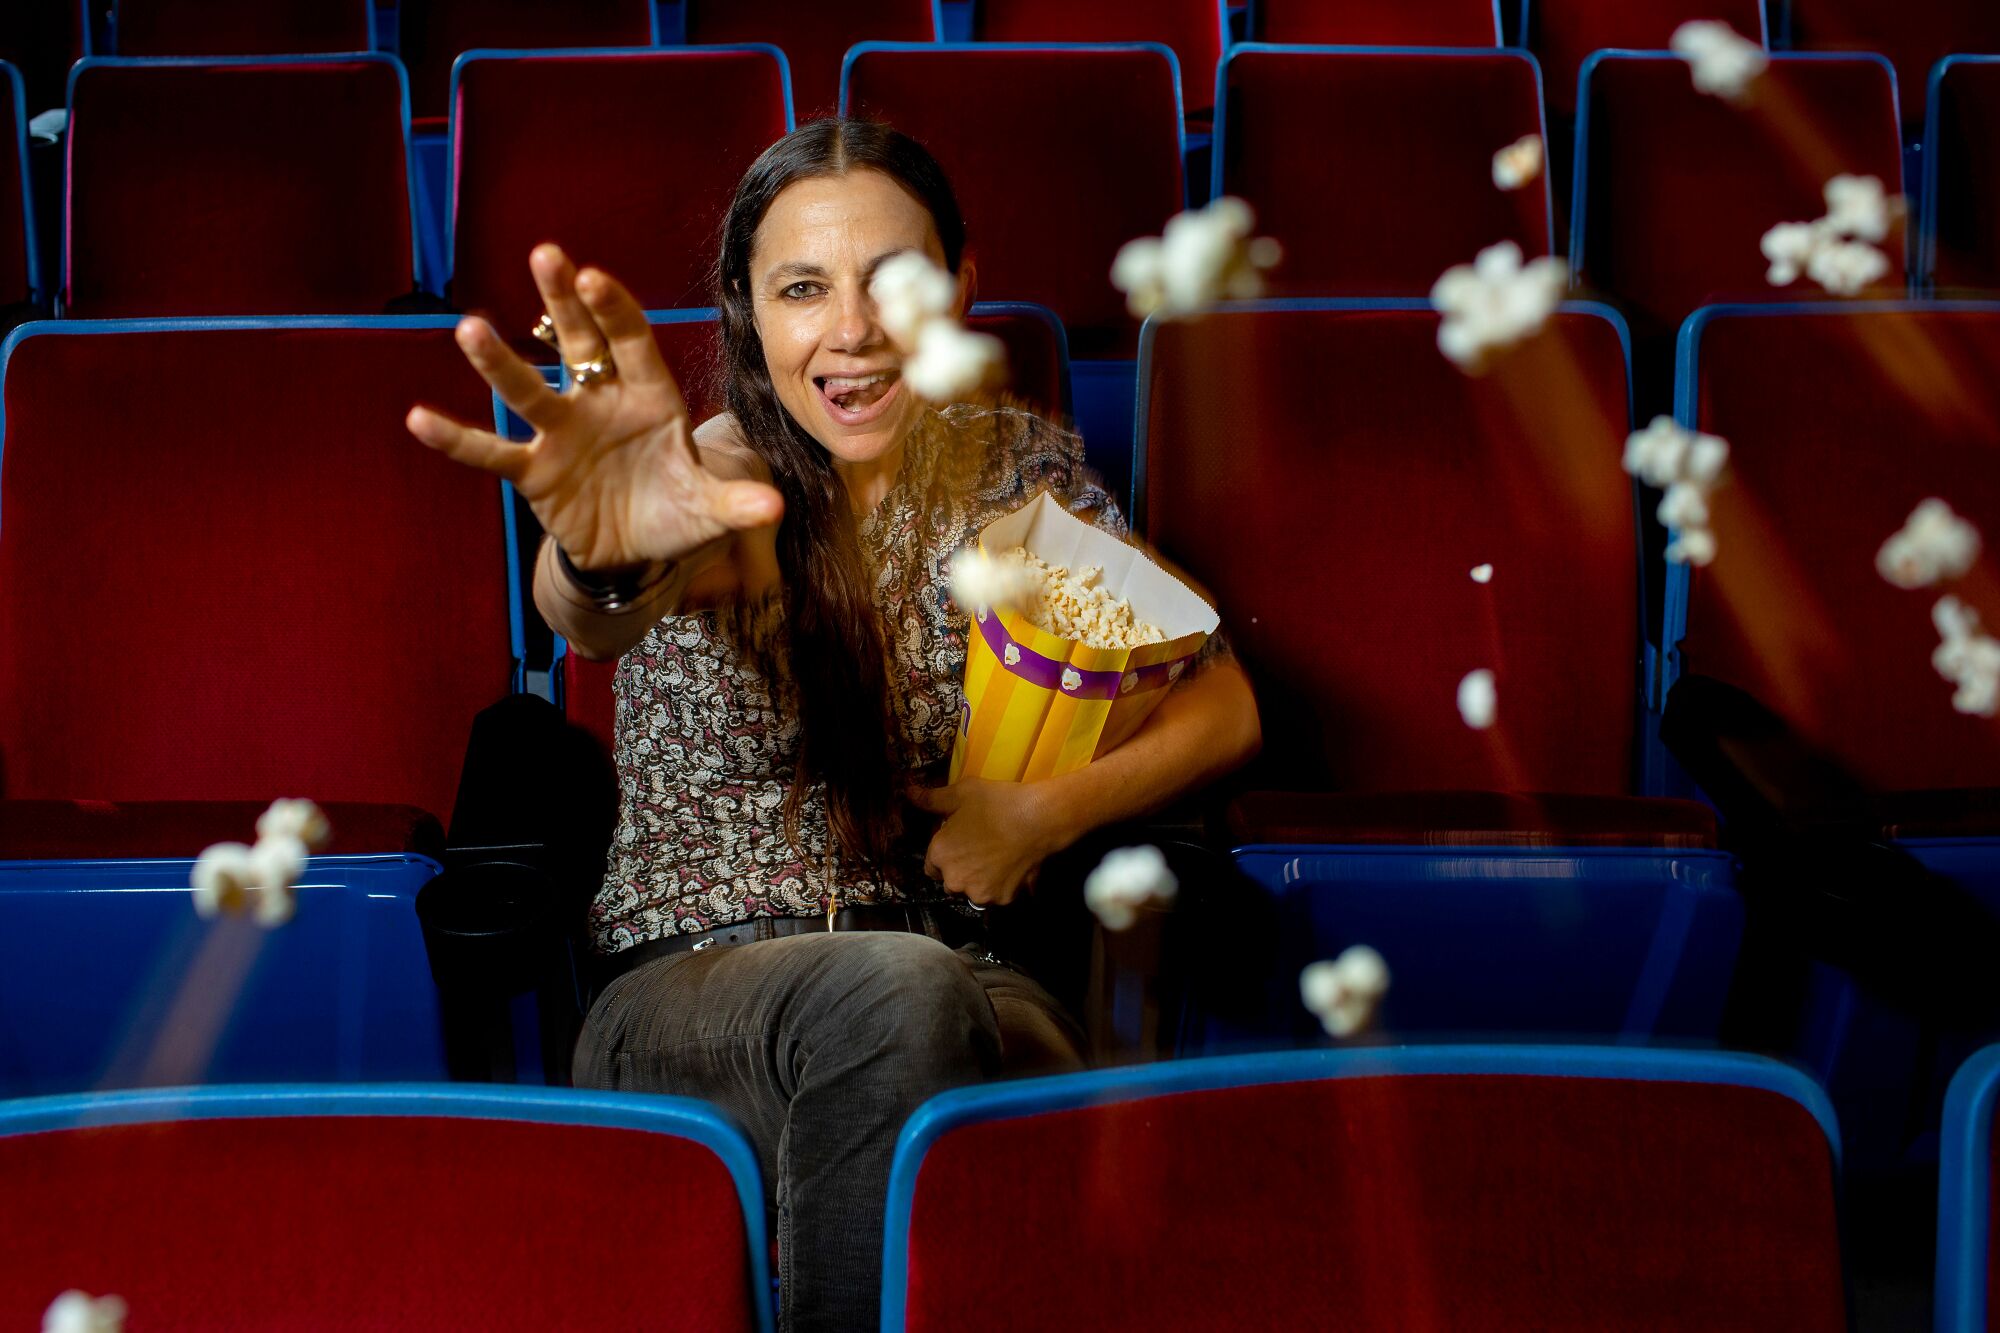 March 5: Actress and writer Justine Batemen sits in a movie theater and throws popcorn in front of her